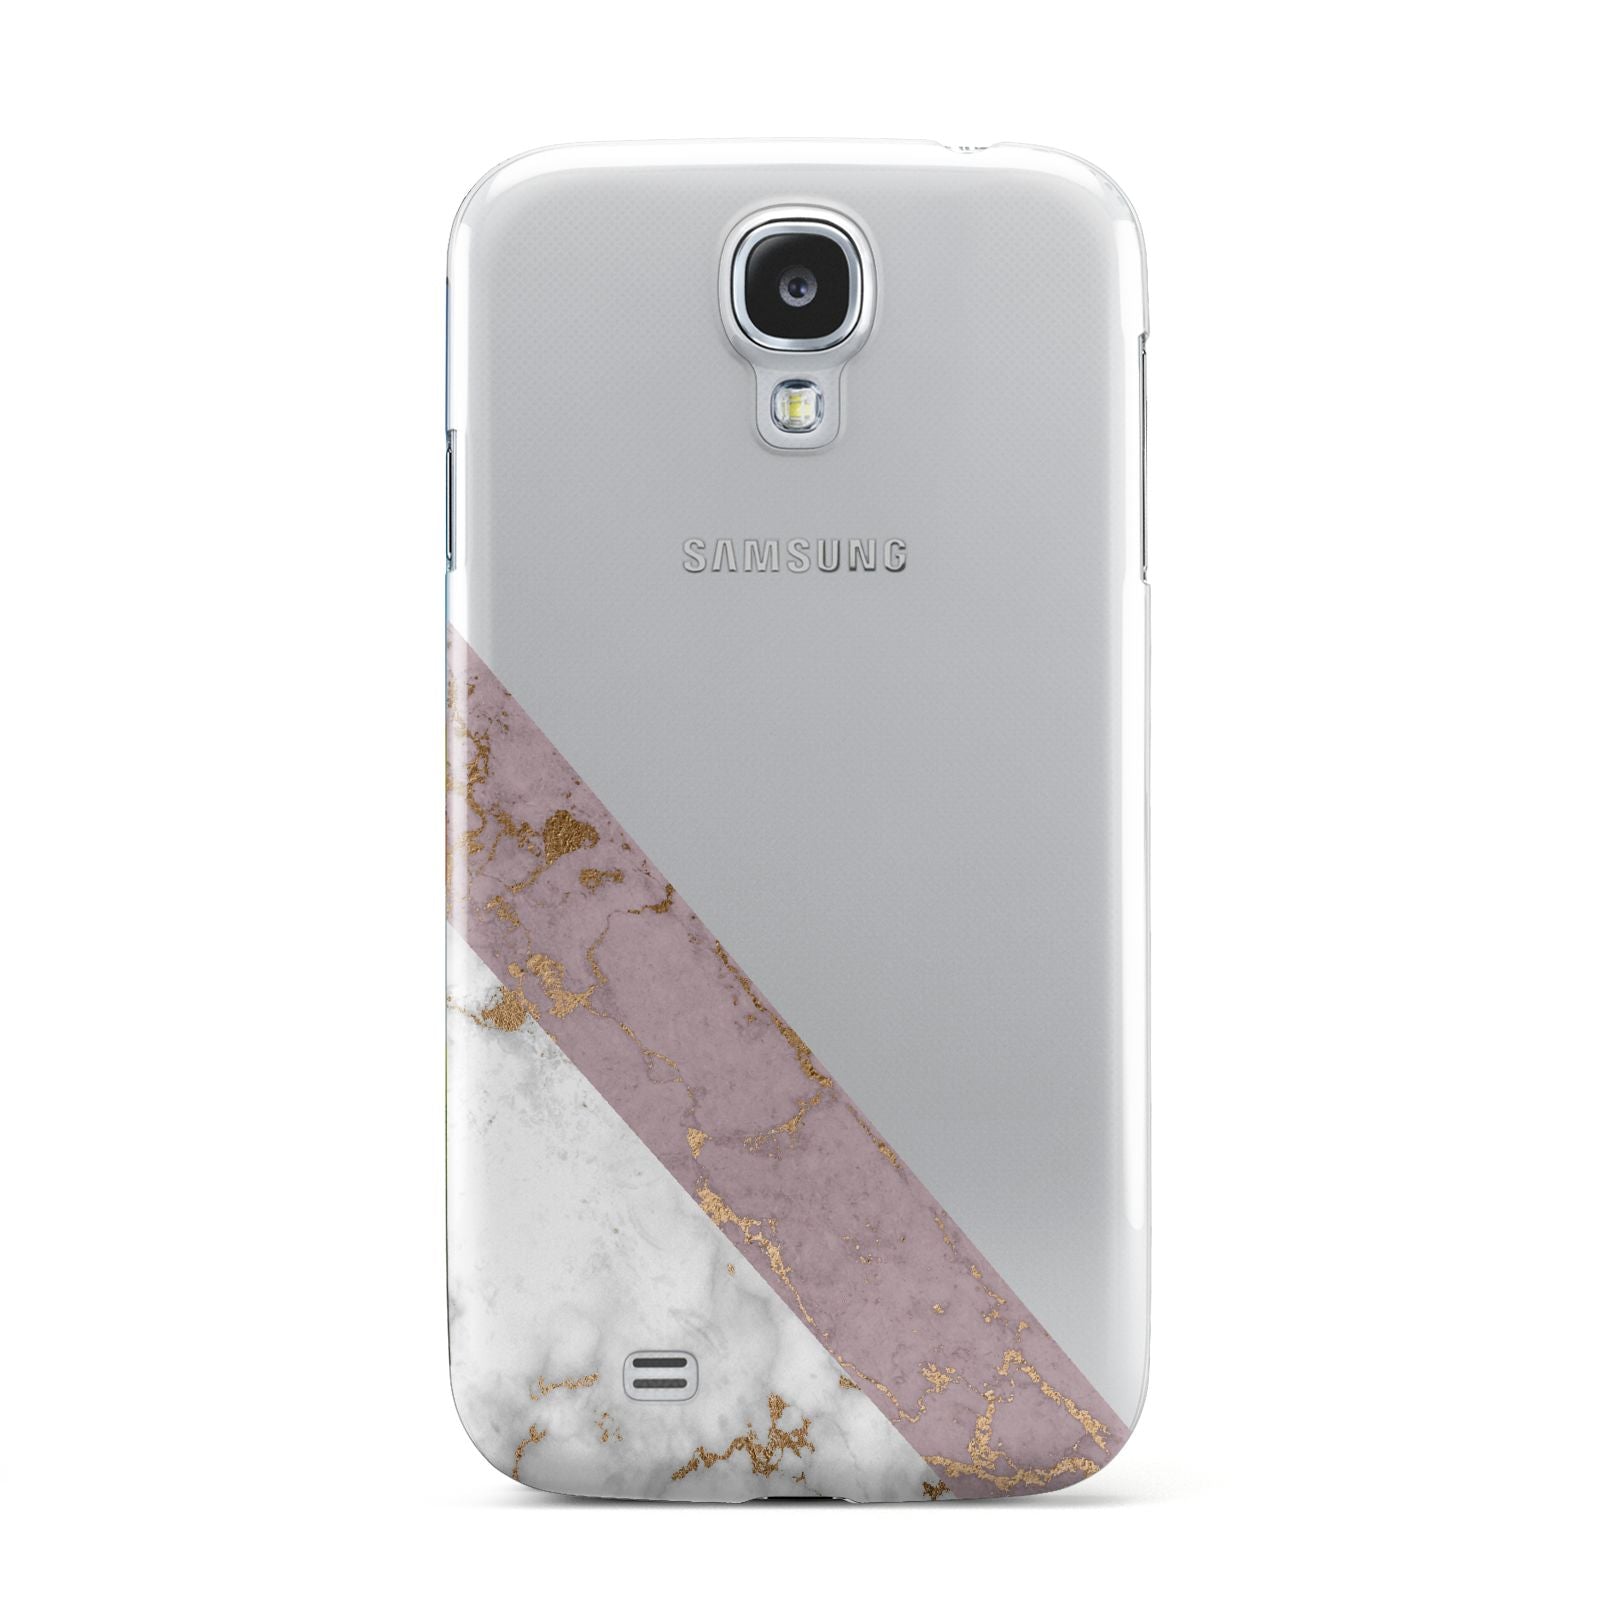 Transparent Pink and White Marble Samsung Galaxy S4 Case